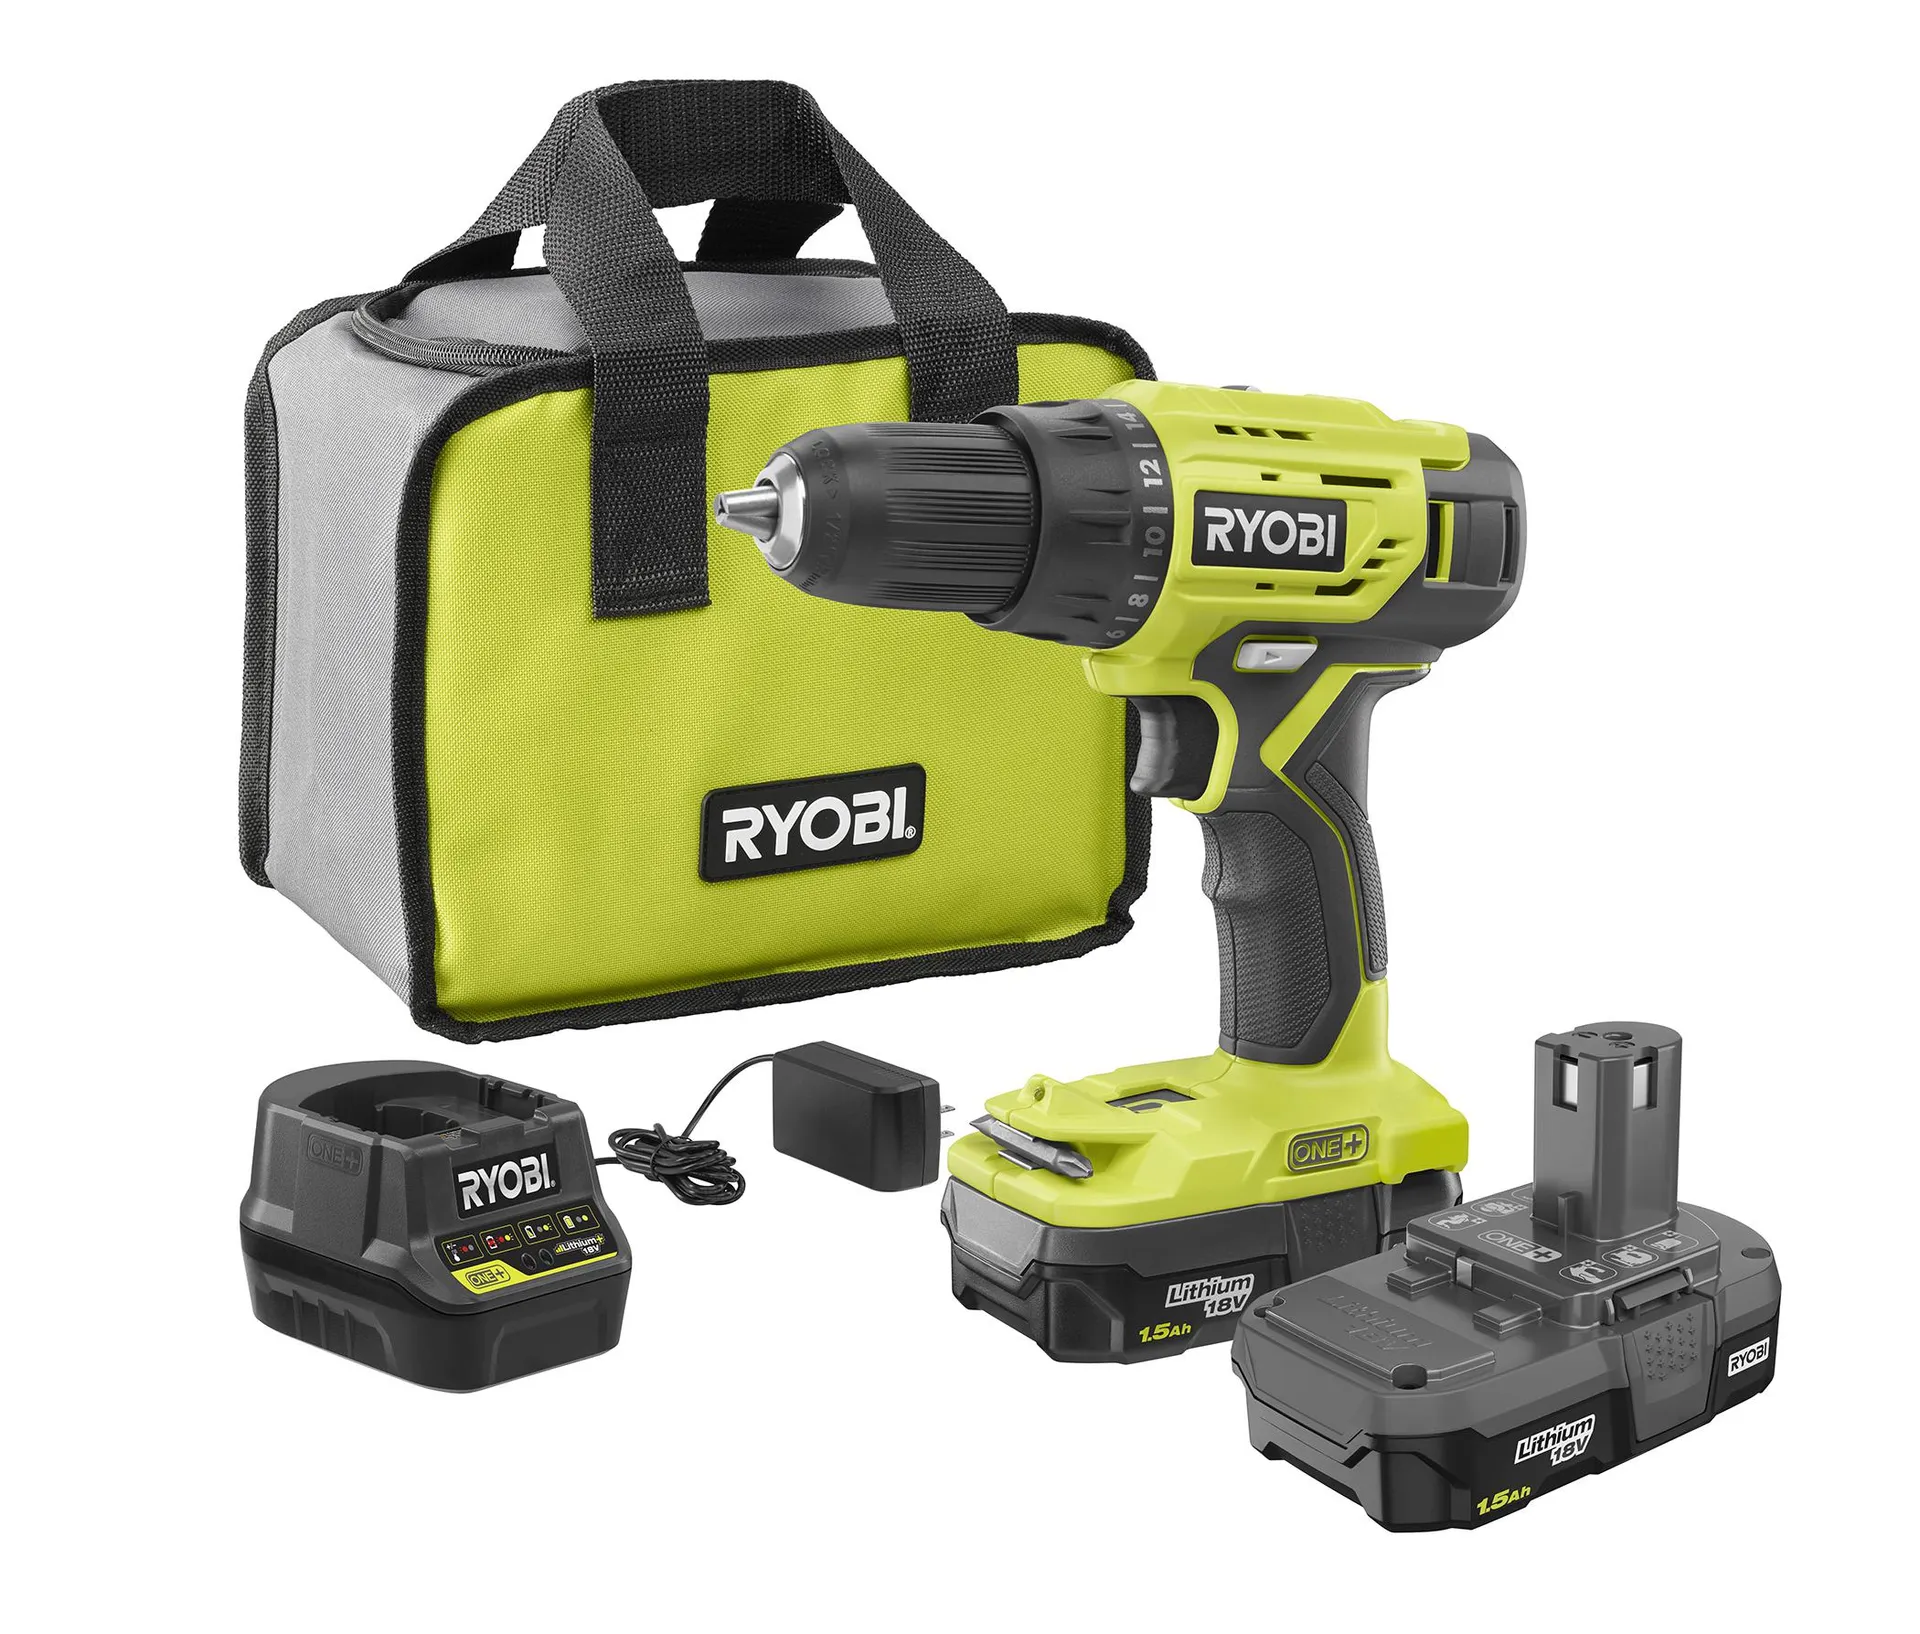 18V ONE+ 2-SPEED 1/2" DRILL/DRIVER KIT